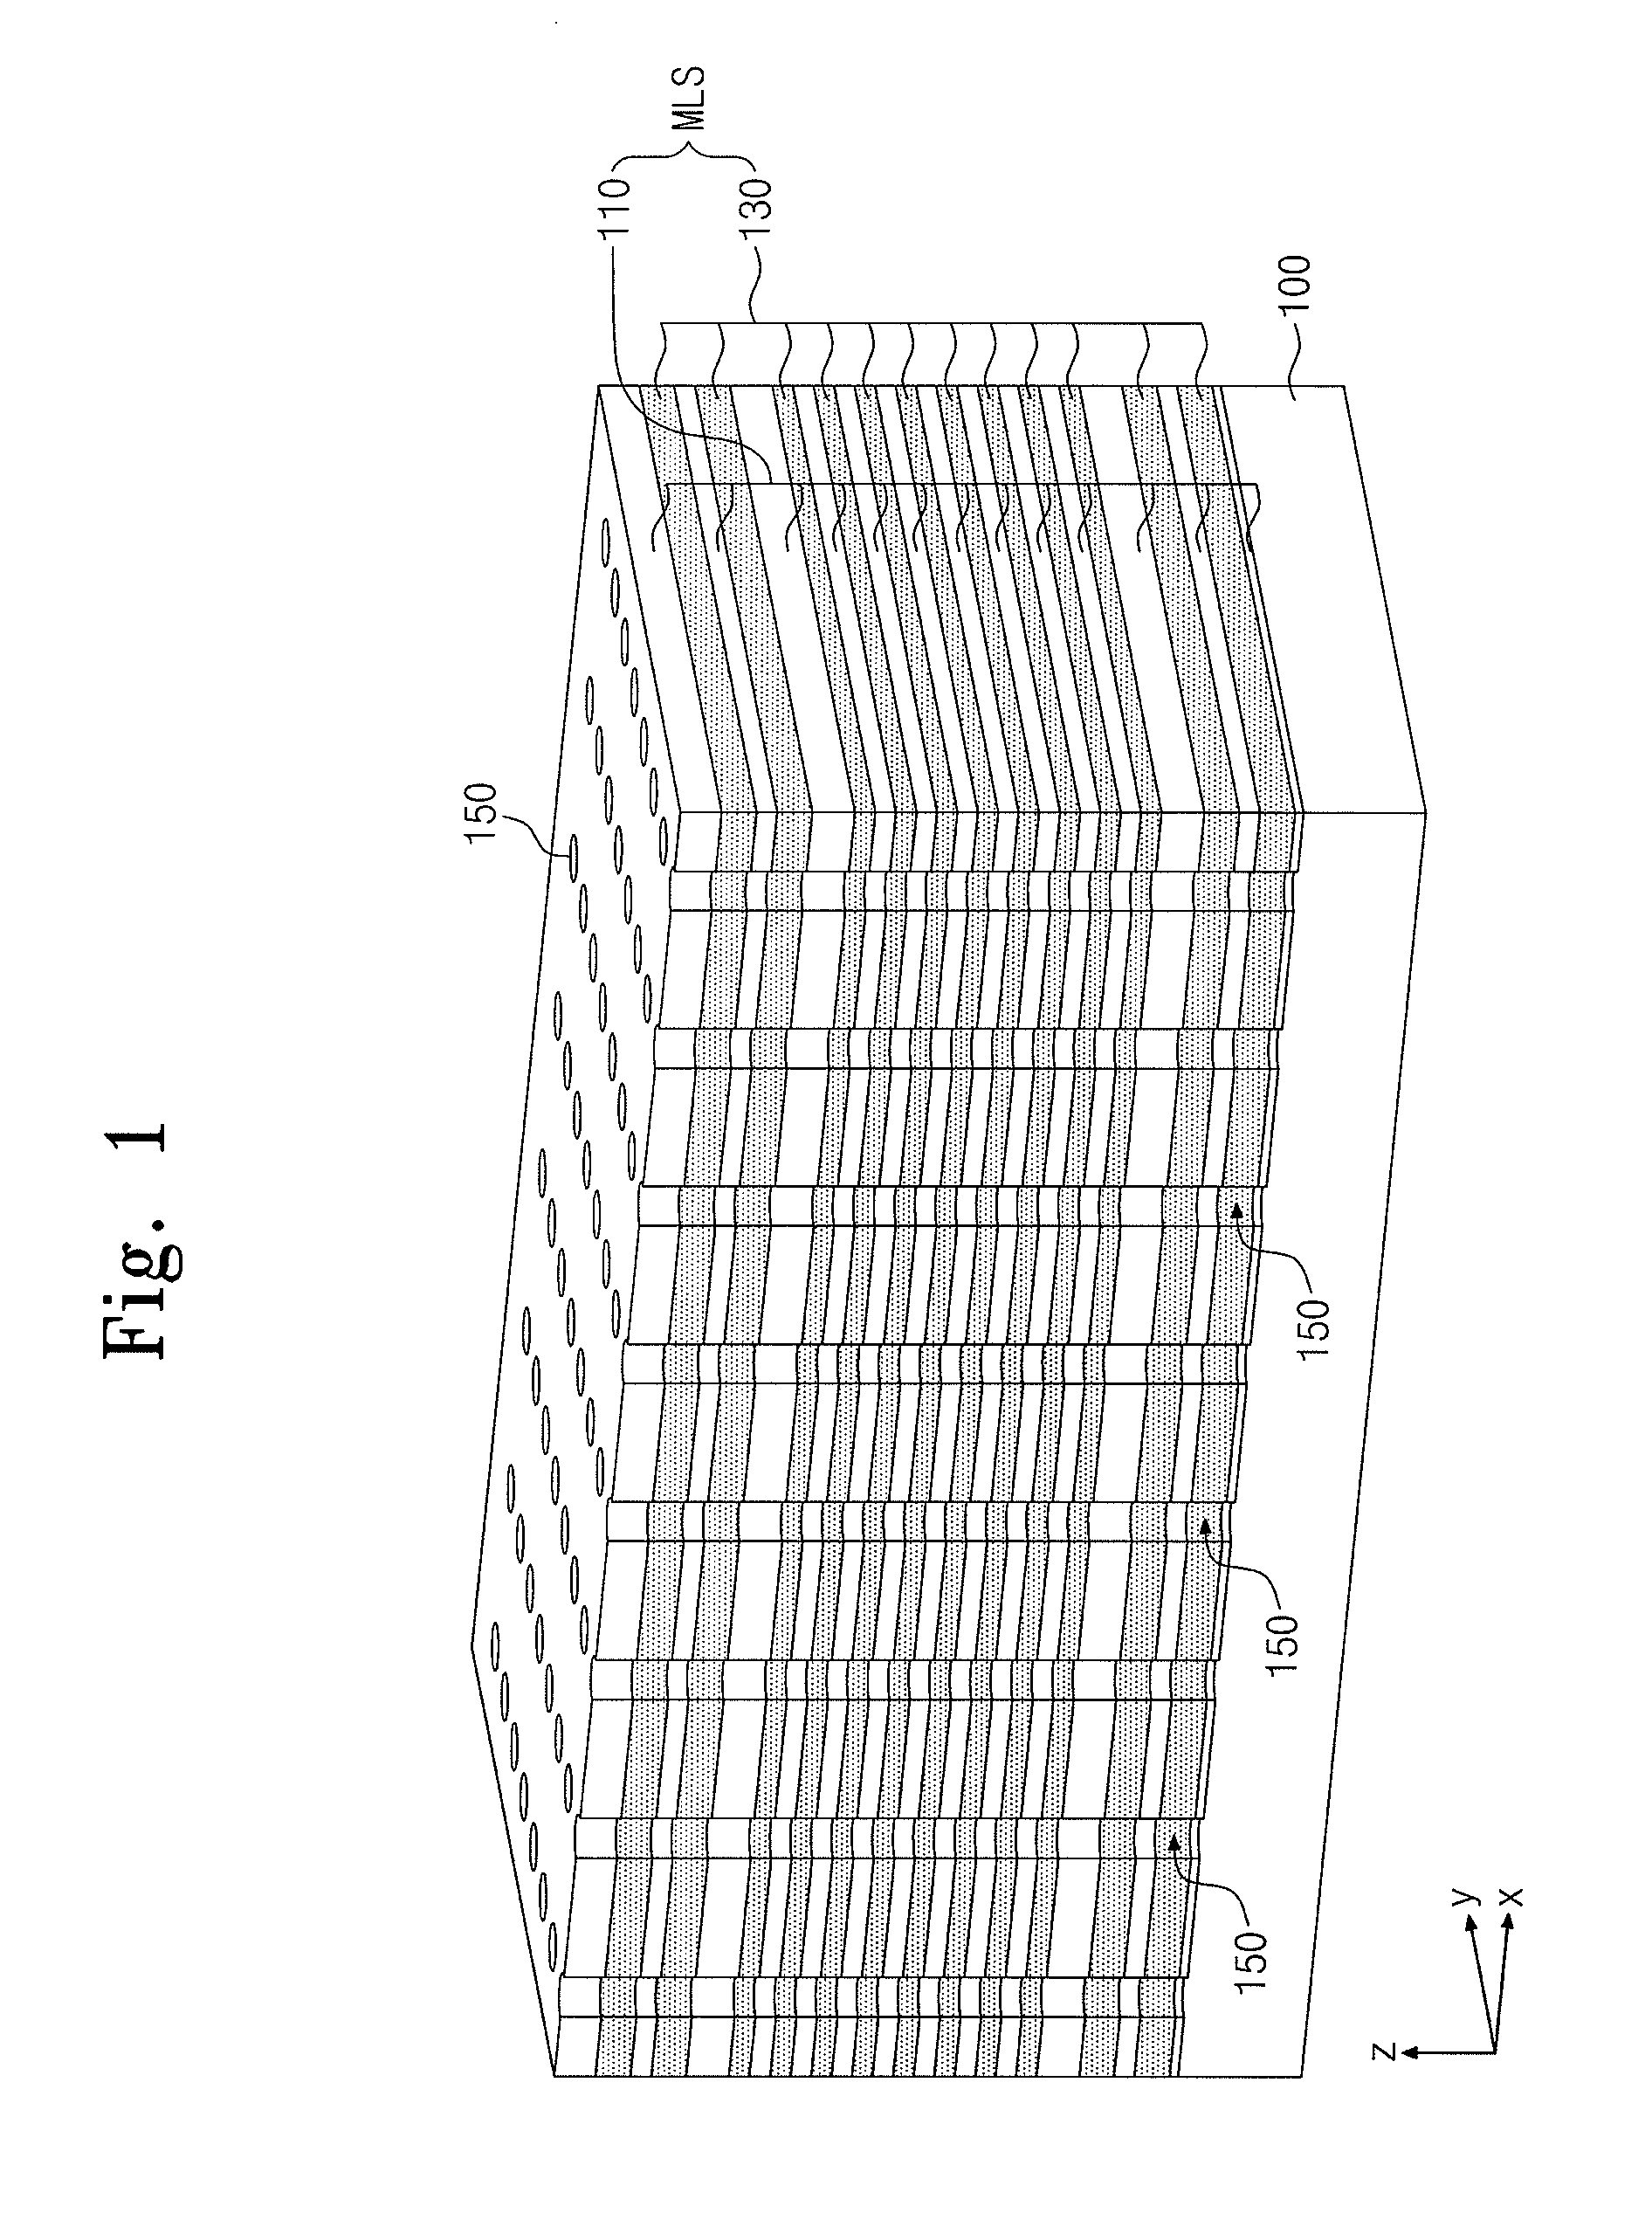 Three-dimensional semiconductor device and method of fabricating the same